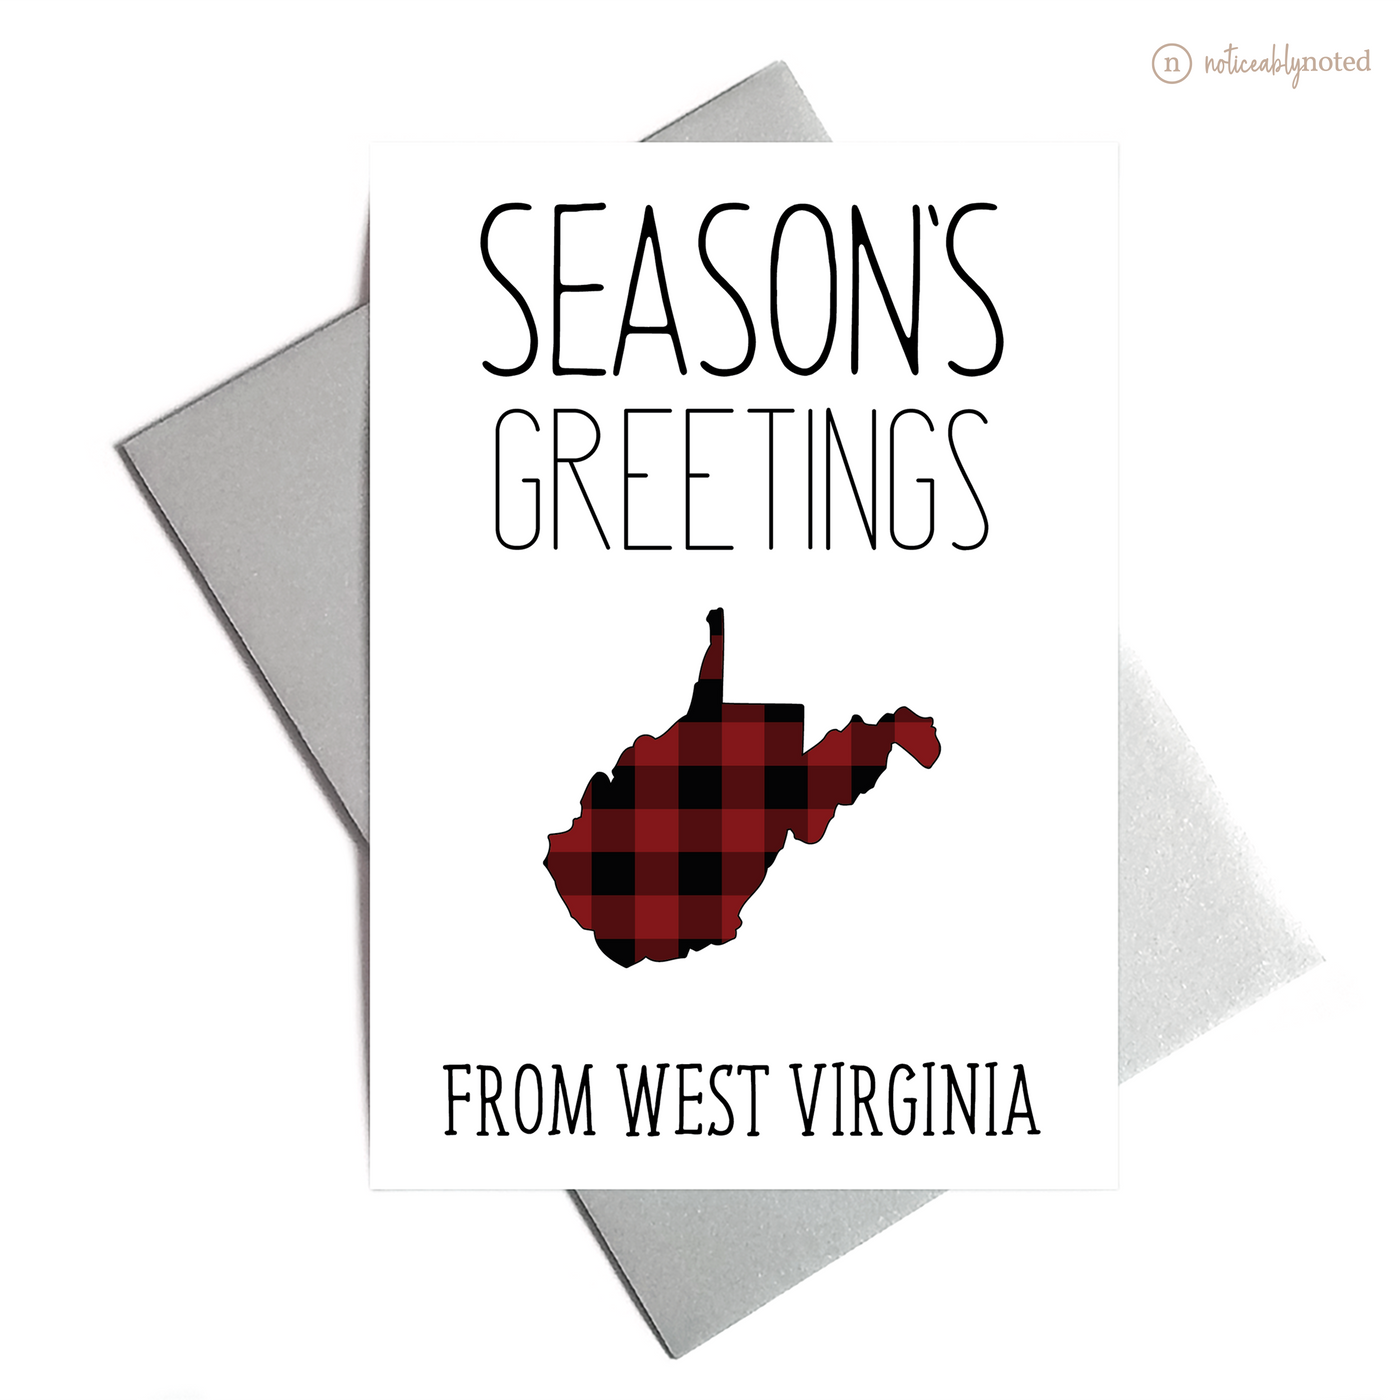 West Virginia Holiday Card - Season's Greetings | Noticeably Noted